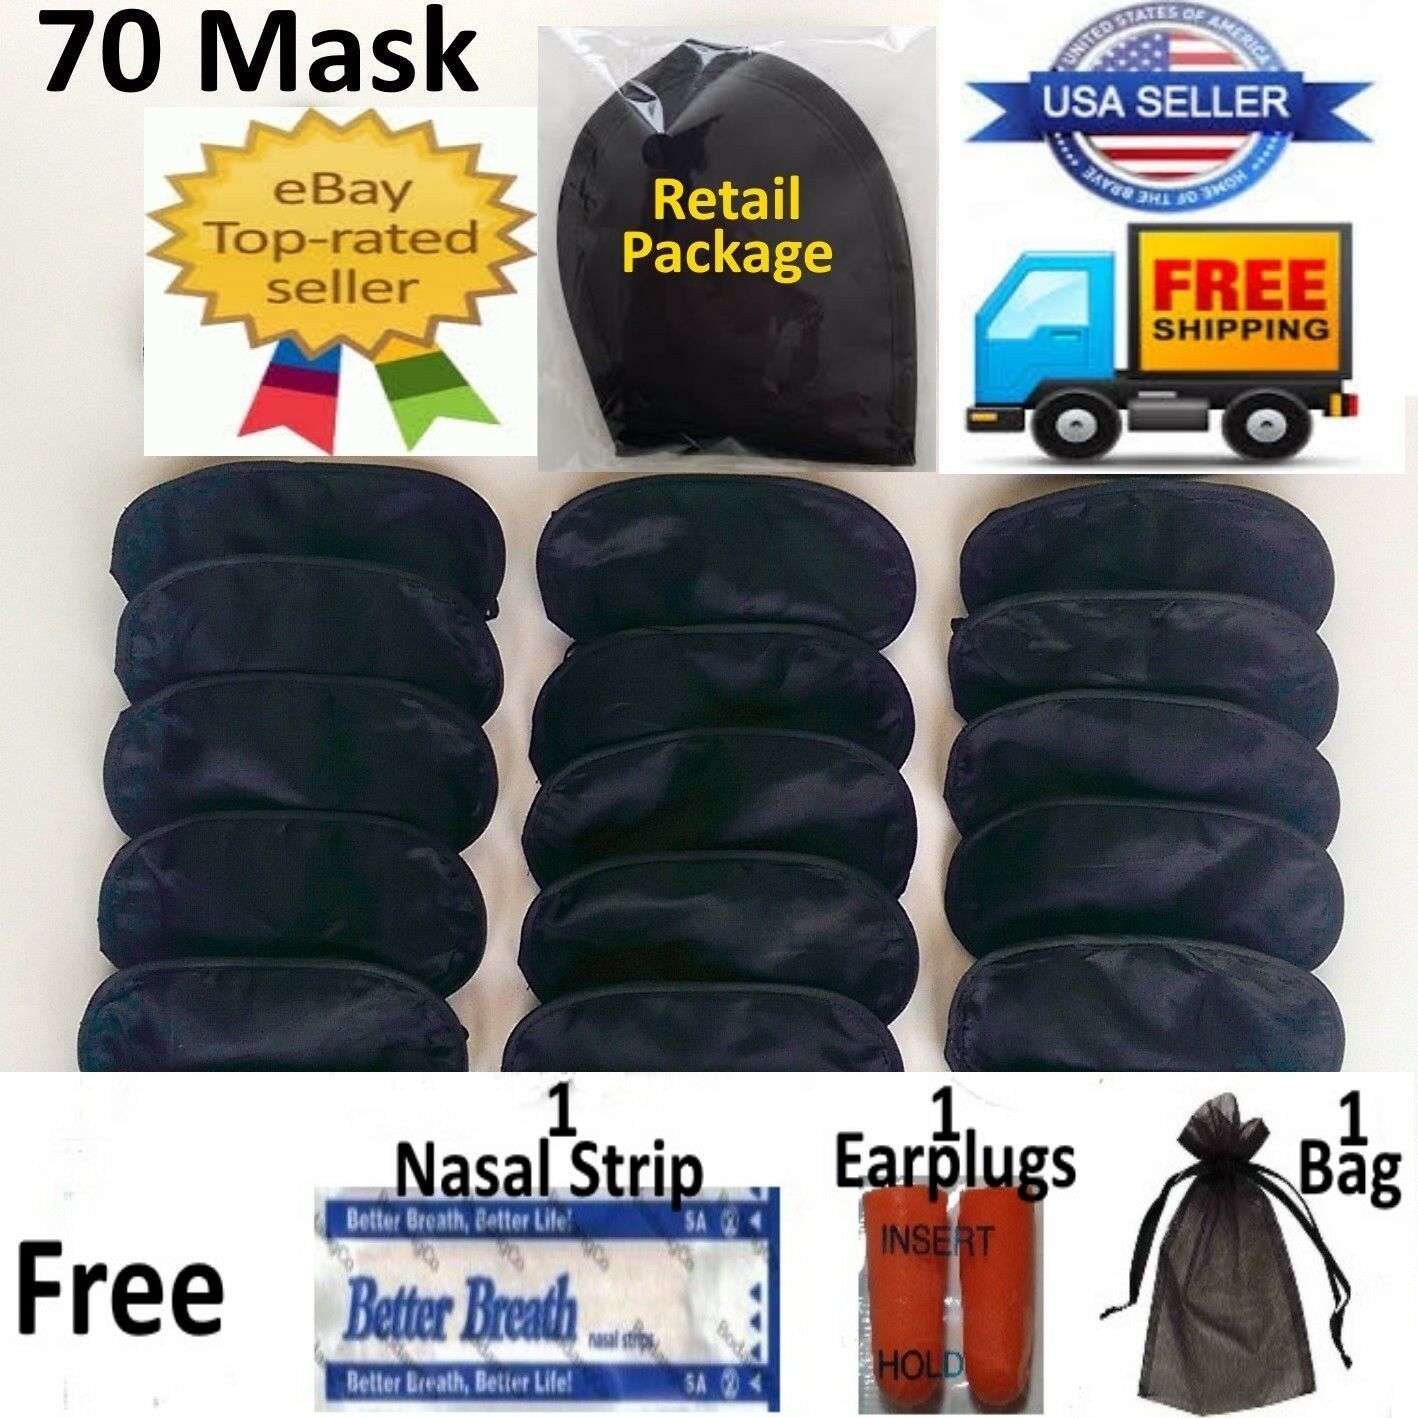 Travel Sleep Eye Mask 70 Lot Shade Cover Blindfold Rest Relax Aid Wholesale